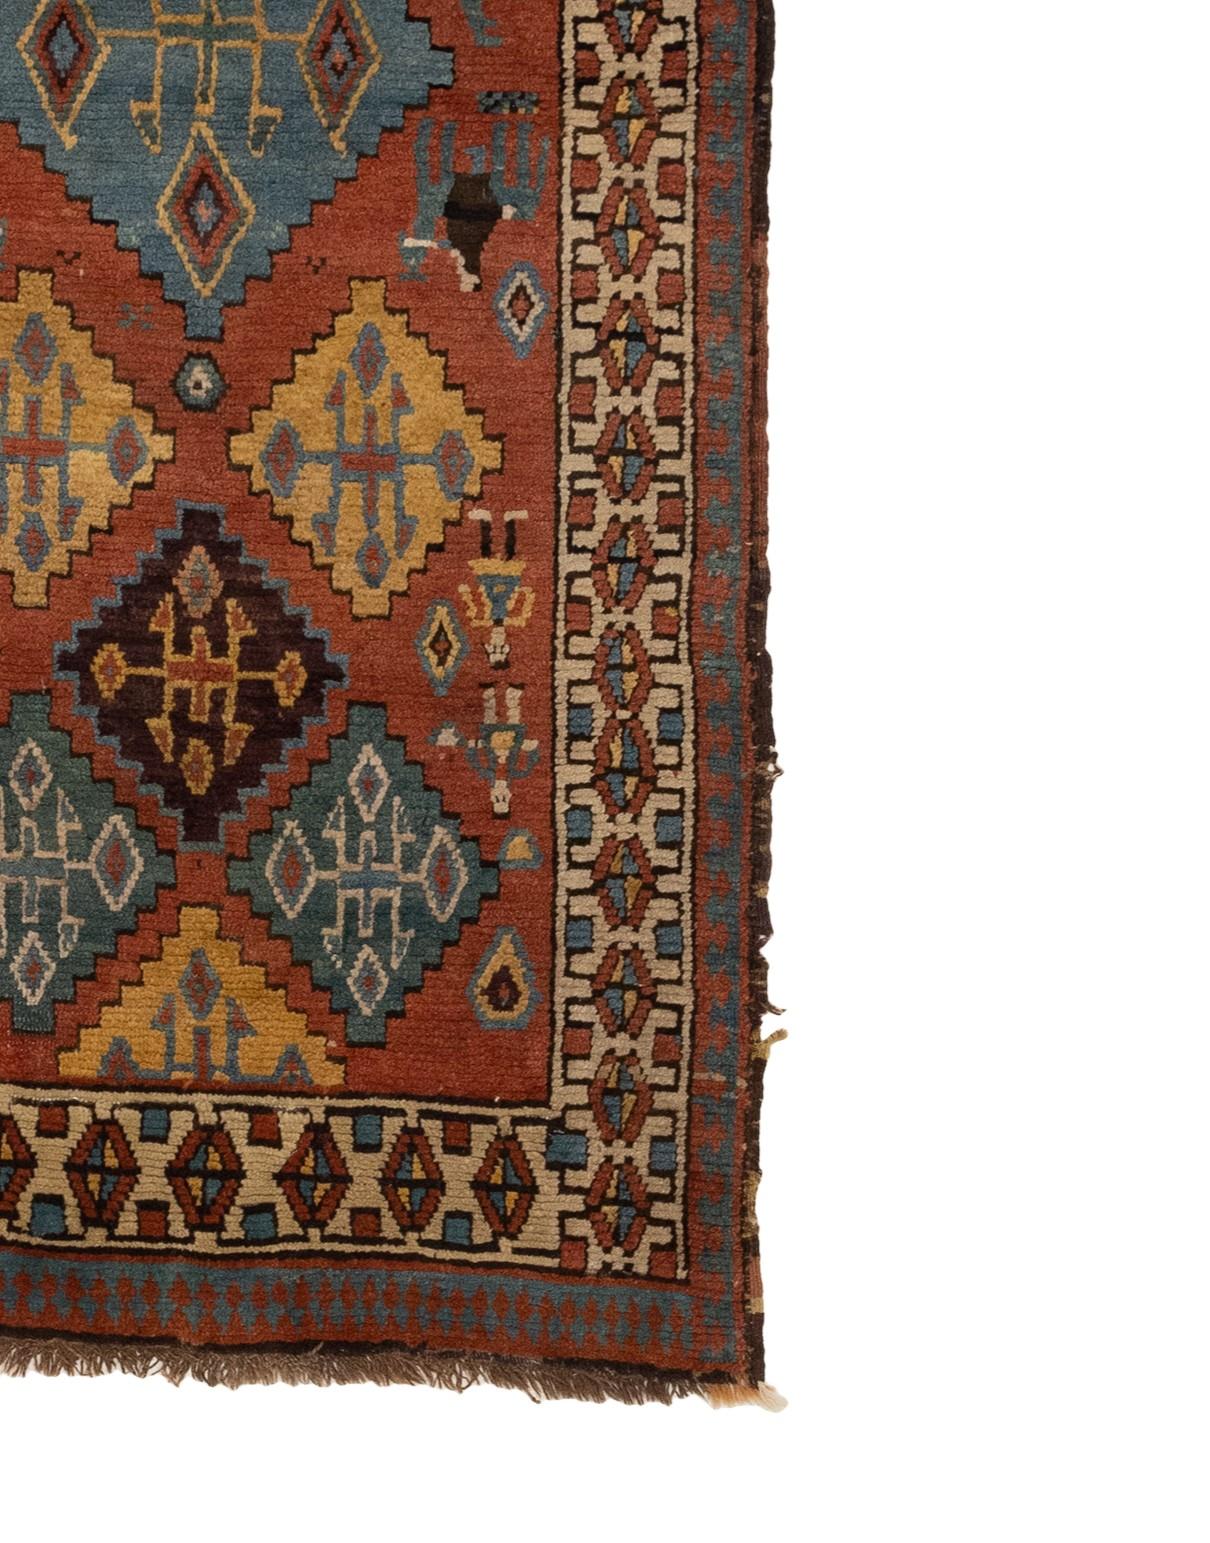 This is an Antique Caucasian Kazak from the 1880s featuring multicolored diamonds. Its intricate details are stunning, and it boasts a variety of geometric patterns in color schemes that range from earthy to vibrant. The Tribal Collection is perfect